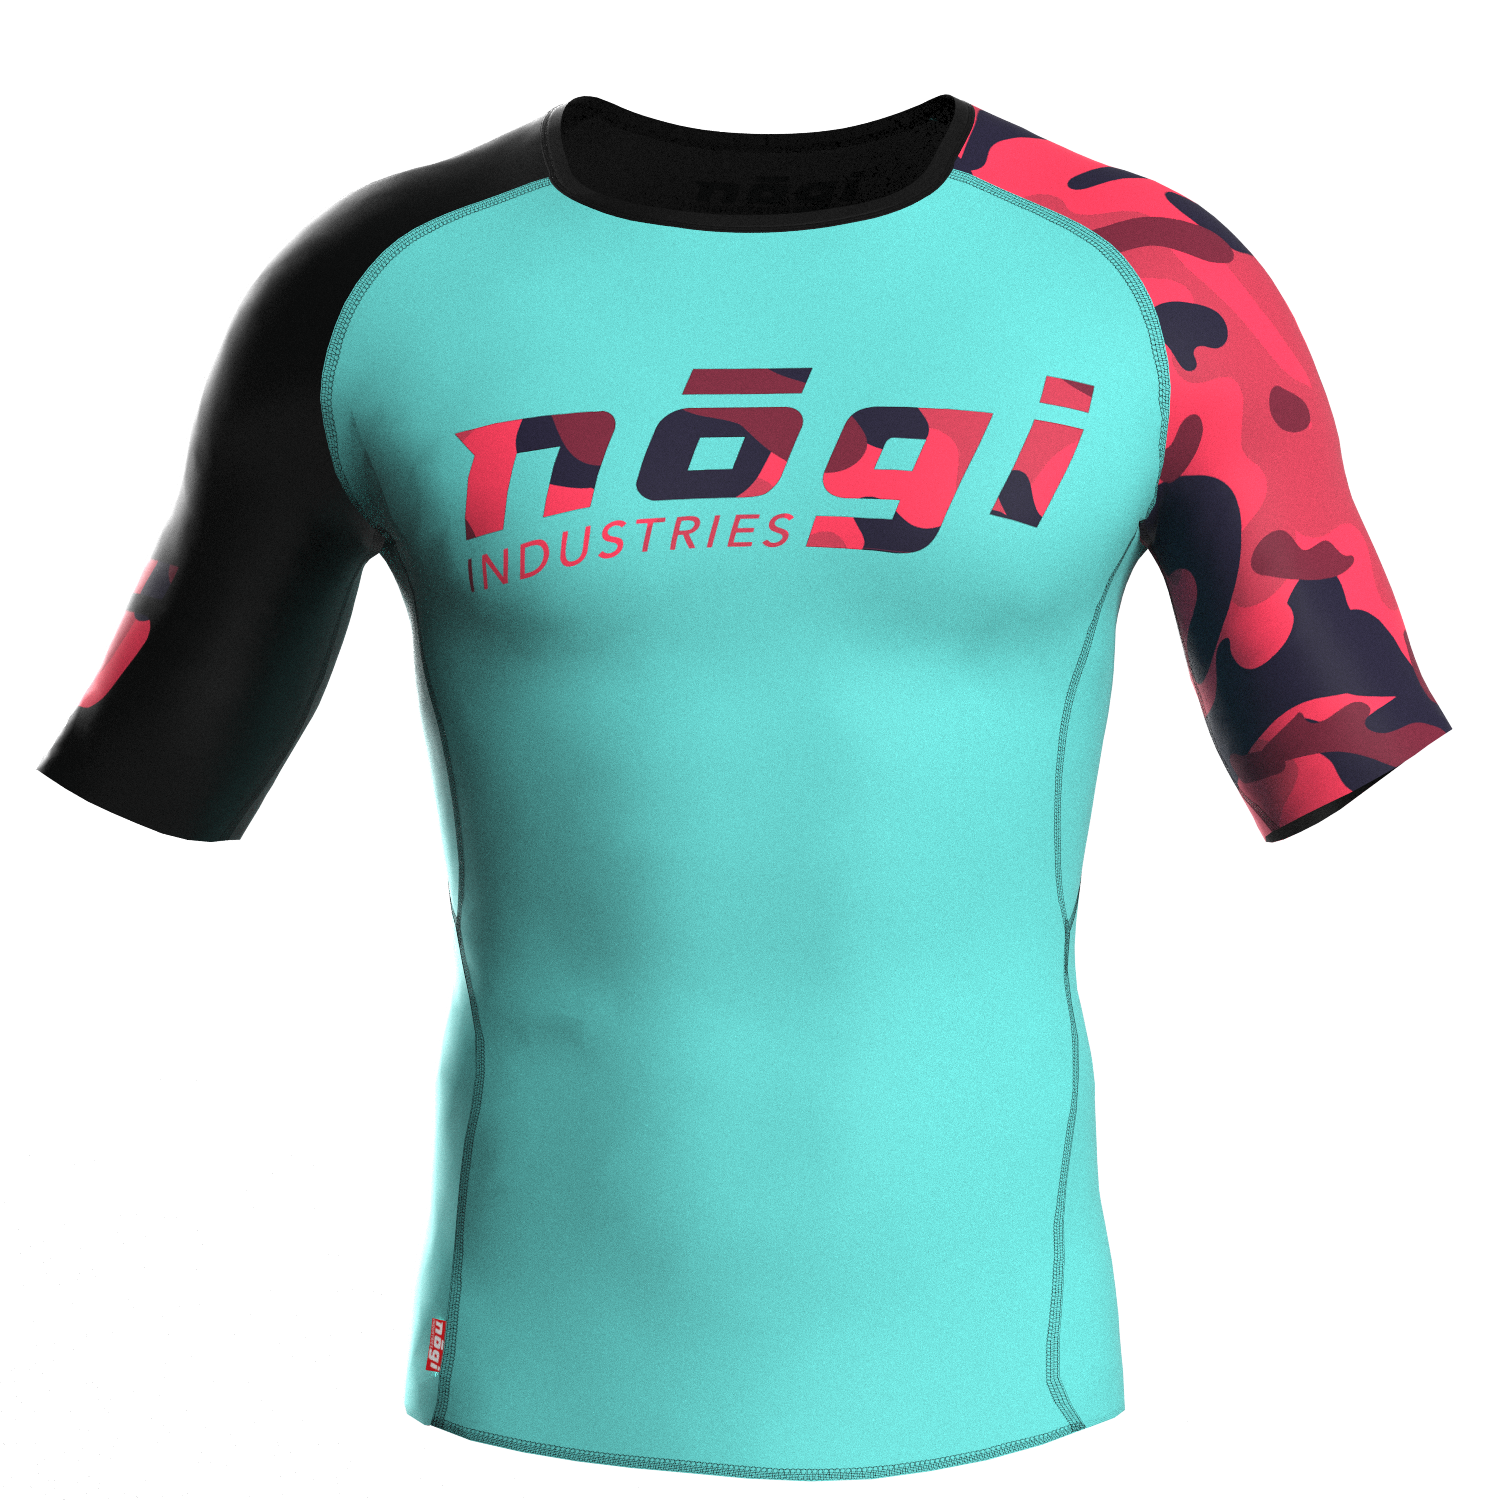 Recall Camo Short Sleeve Rash guard Teal with Red Camo Front